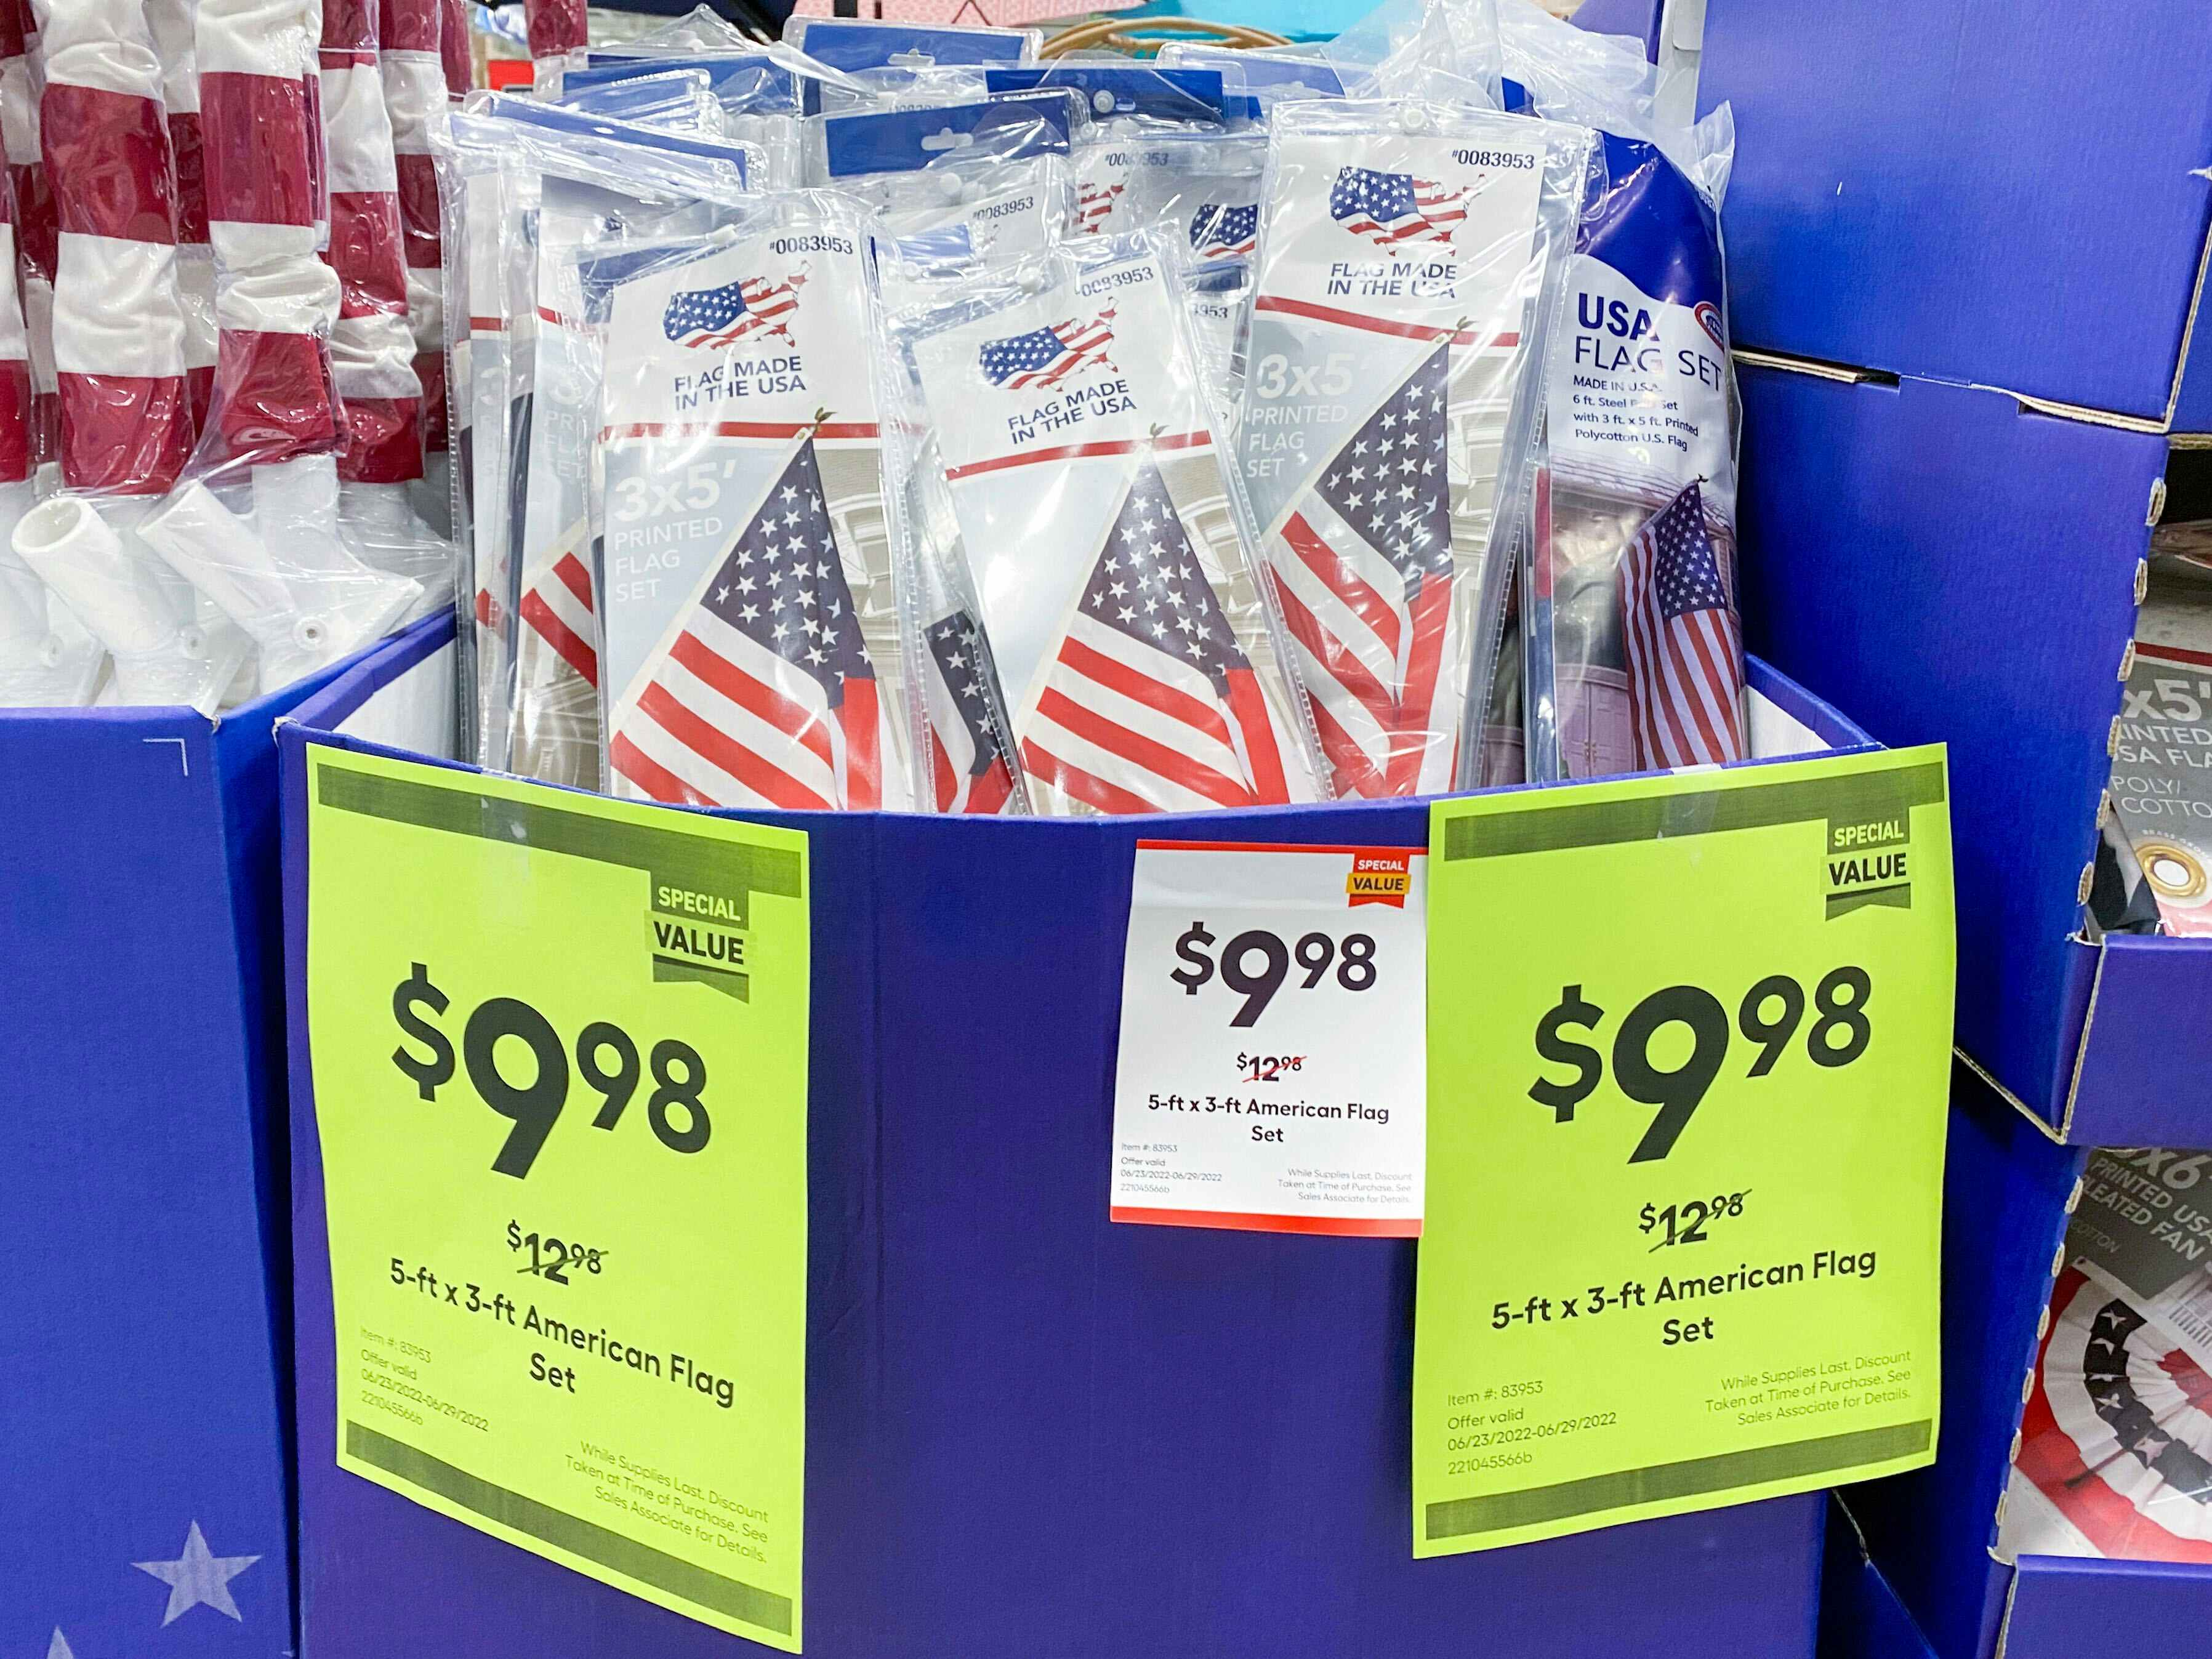 Valley Forge American Flags on display at Lowe's. Sales signs indicate that the price is $9.98, regularly $12.98.